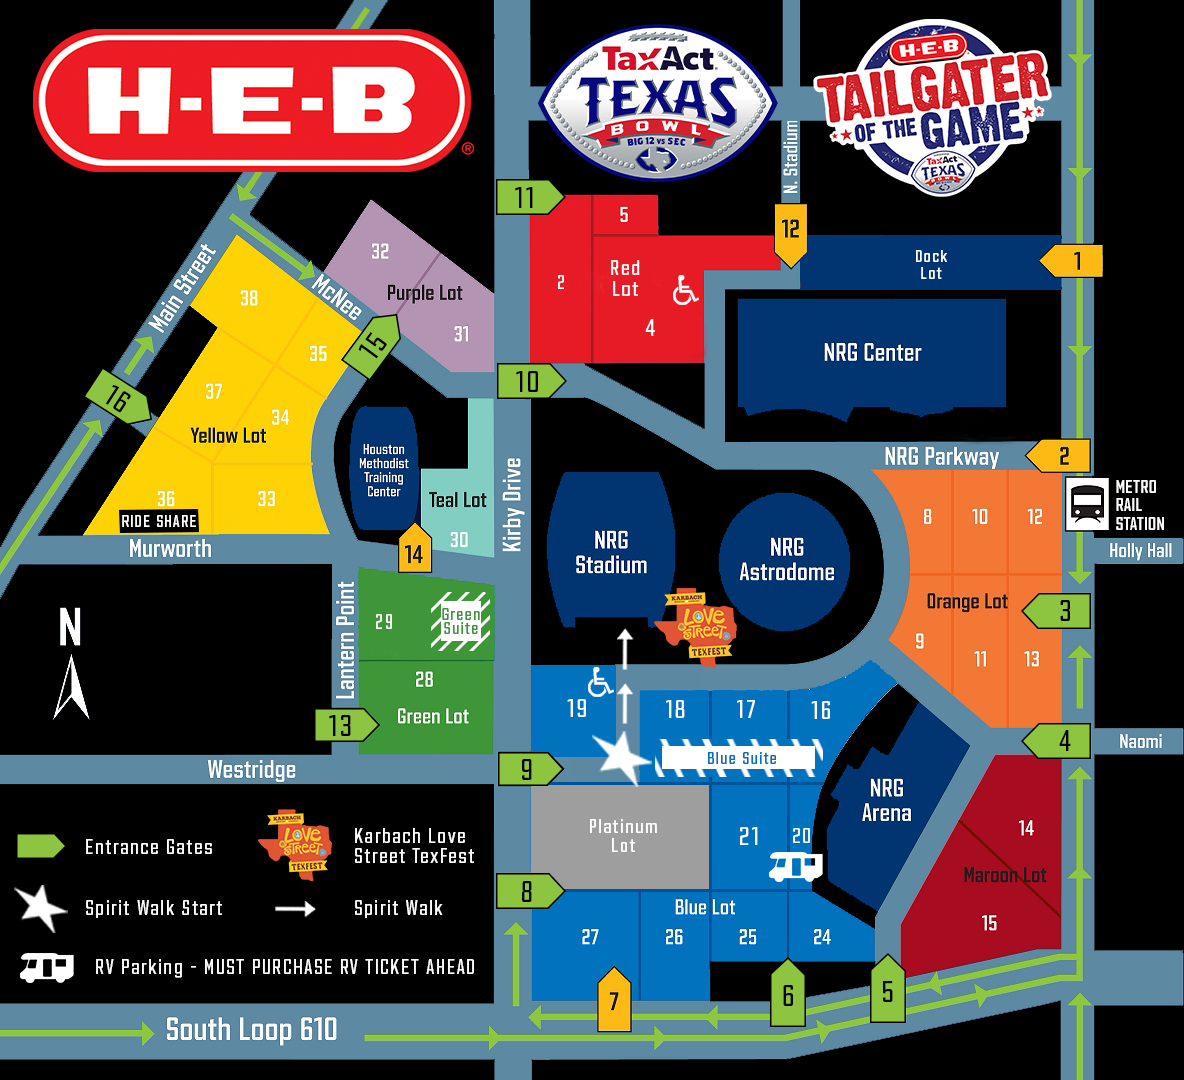 Pakring Map for Academy Sports and Outdoor Texas Bowl